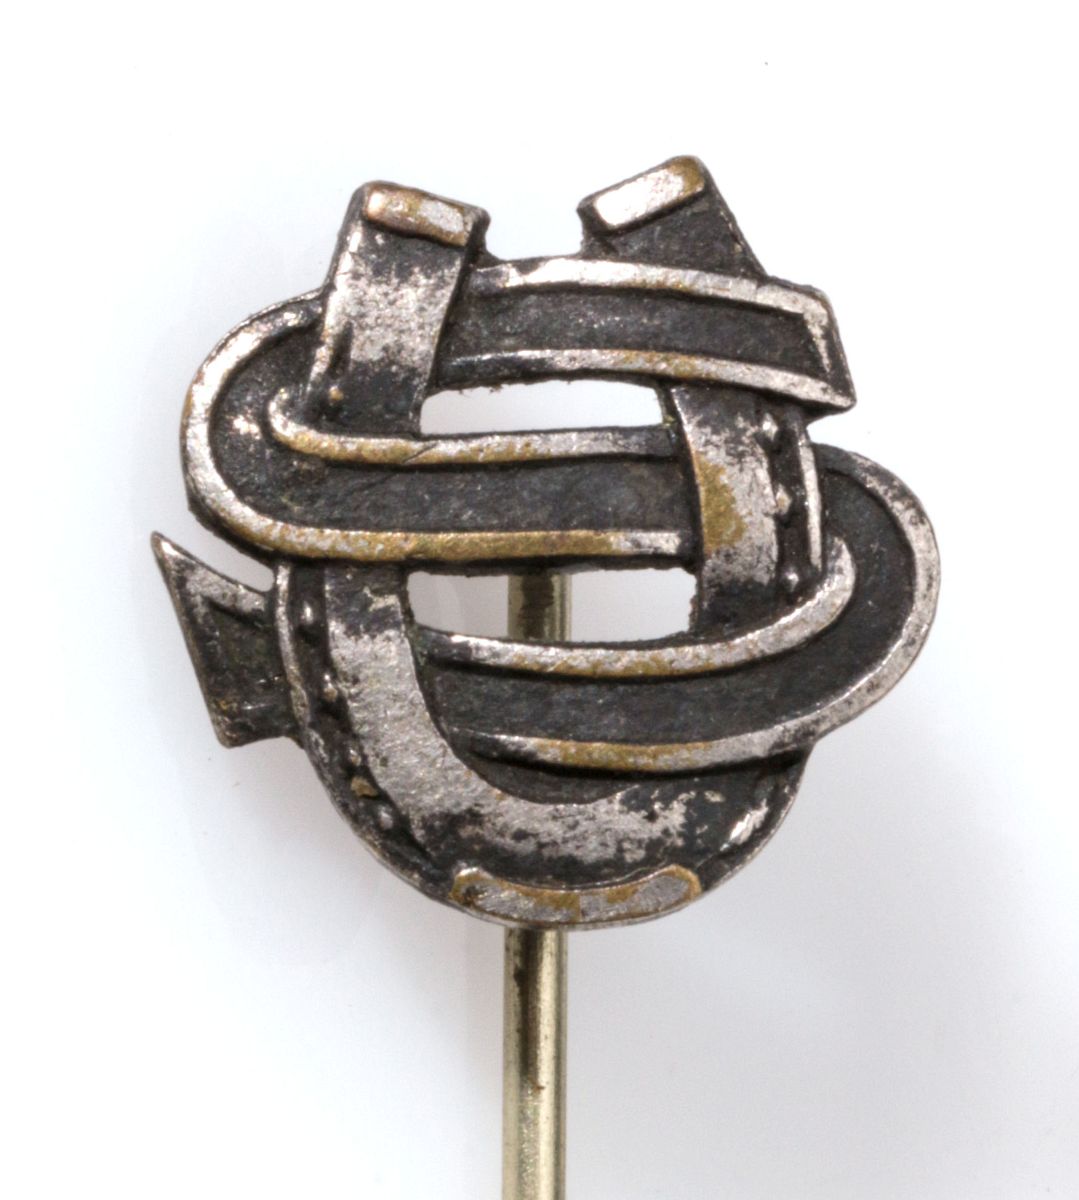 UNITED STATES HORSE SHOE CO. ADVERTISING STICK PIN